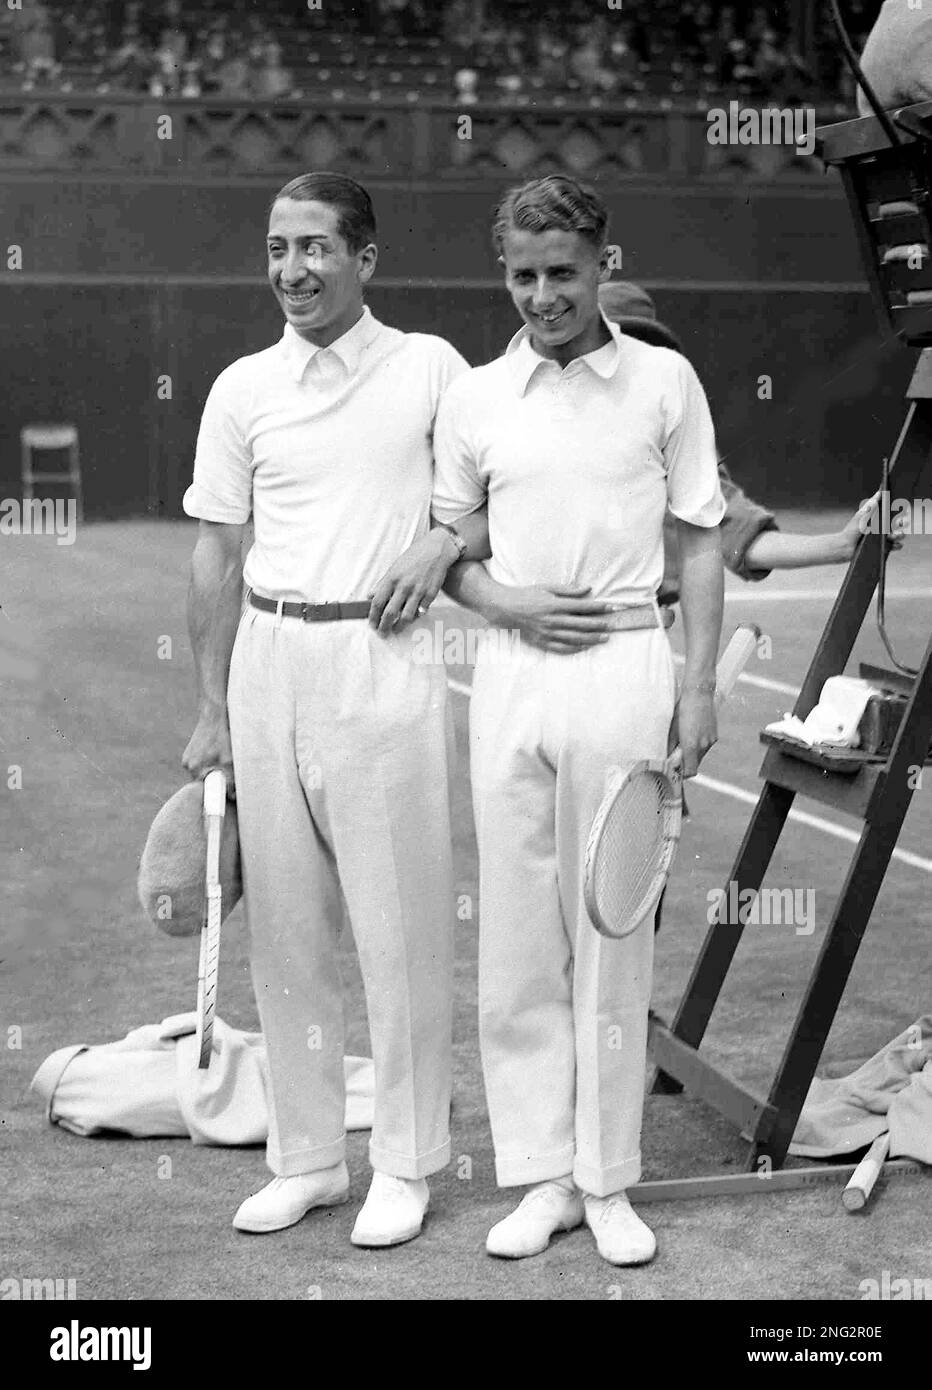 French tennis champion Rene Lacoste, left, and England's Henry W. Austin  after their Wimbledon Men's Singles Championship match, London, June 30,  1928. Lacoste won the match 6-4, 6-4, 6-8, 1-6, 6-2. (AP Photo Stock Photo  - Alamy